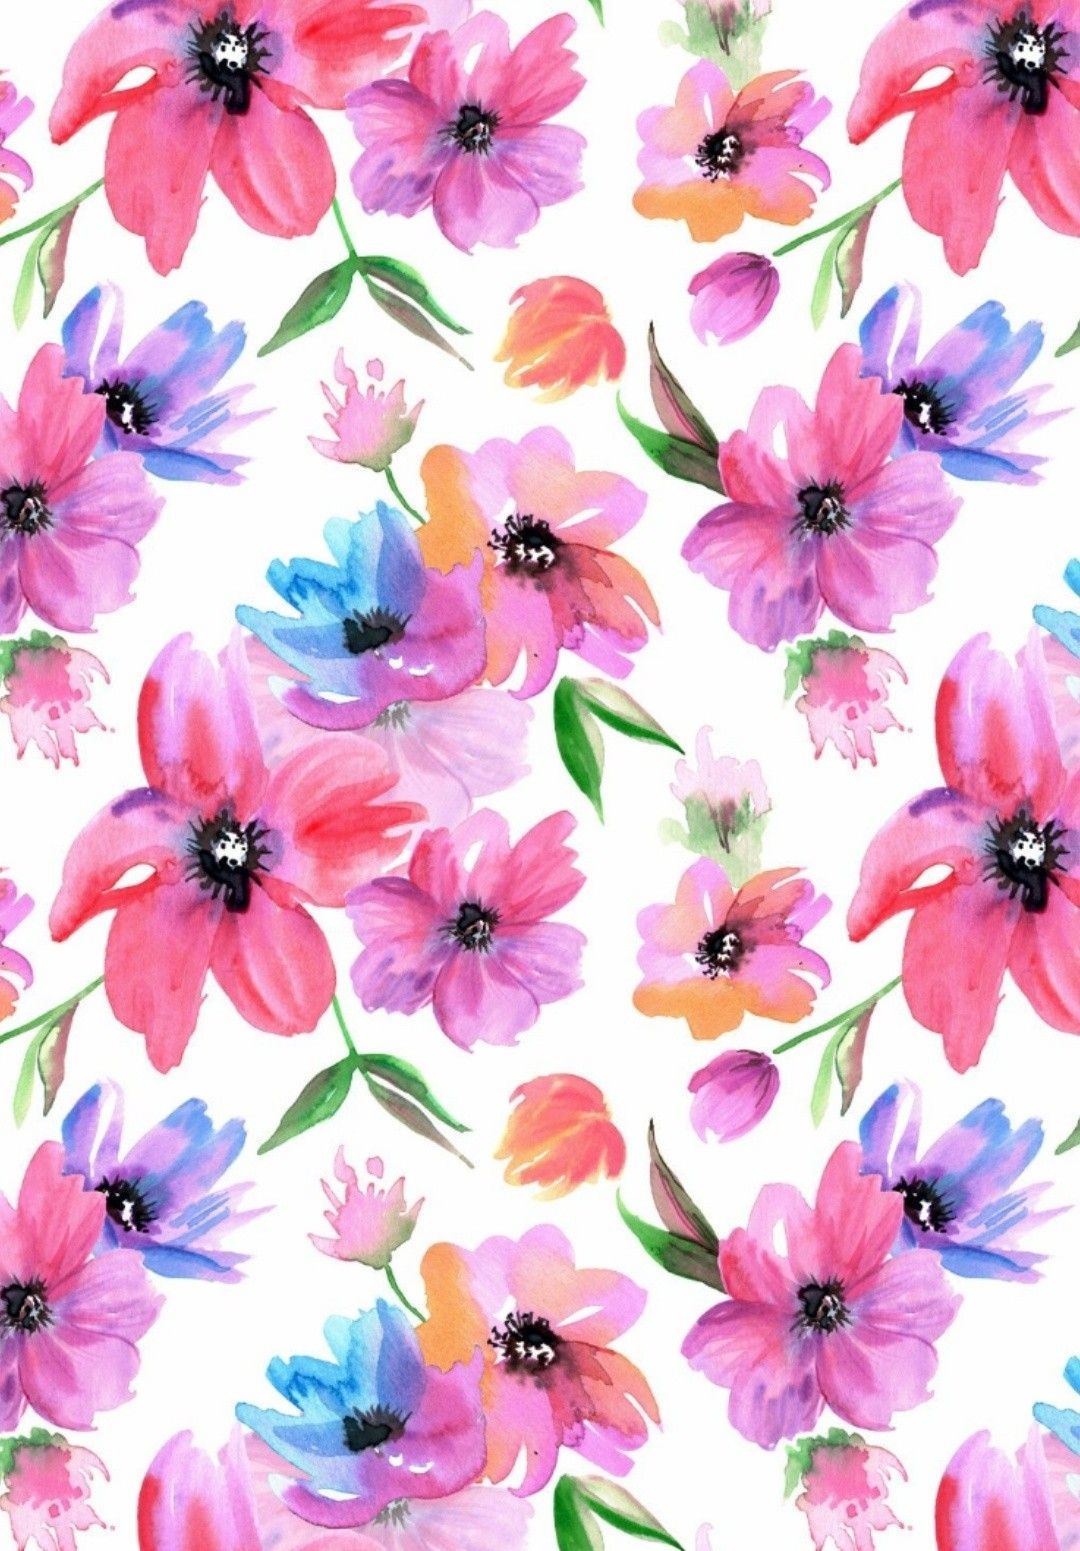 Watercolor Seamless Patterns with Pink and Purple flowers